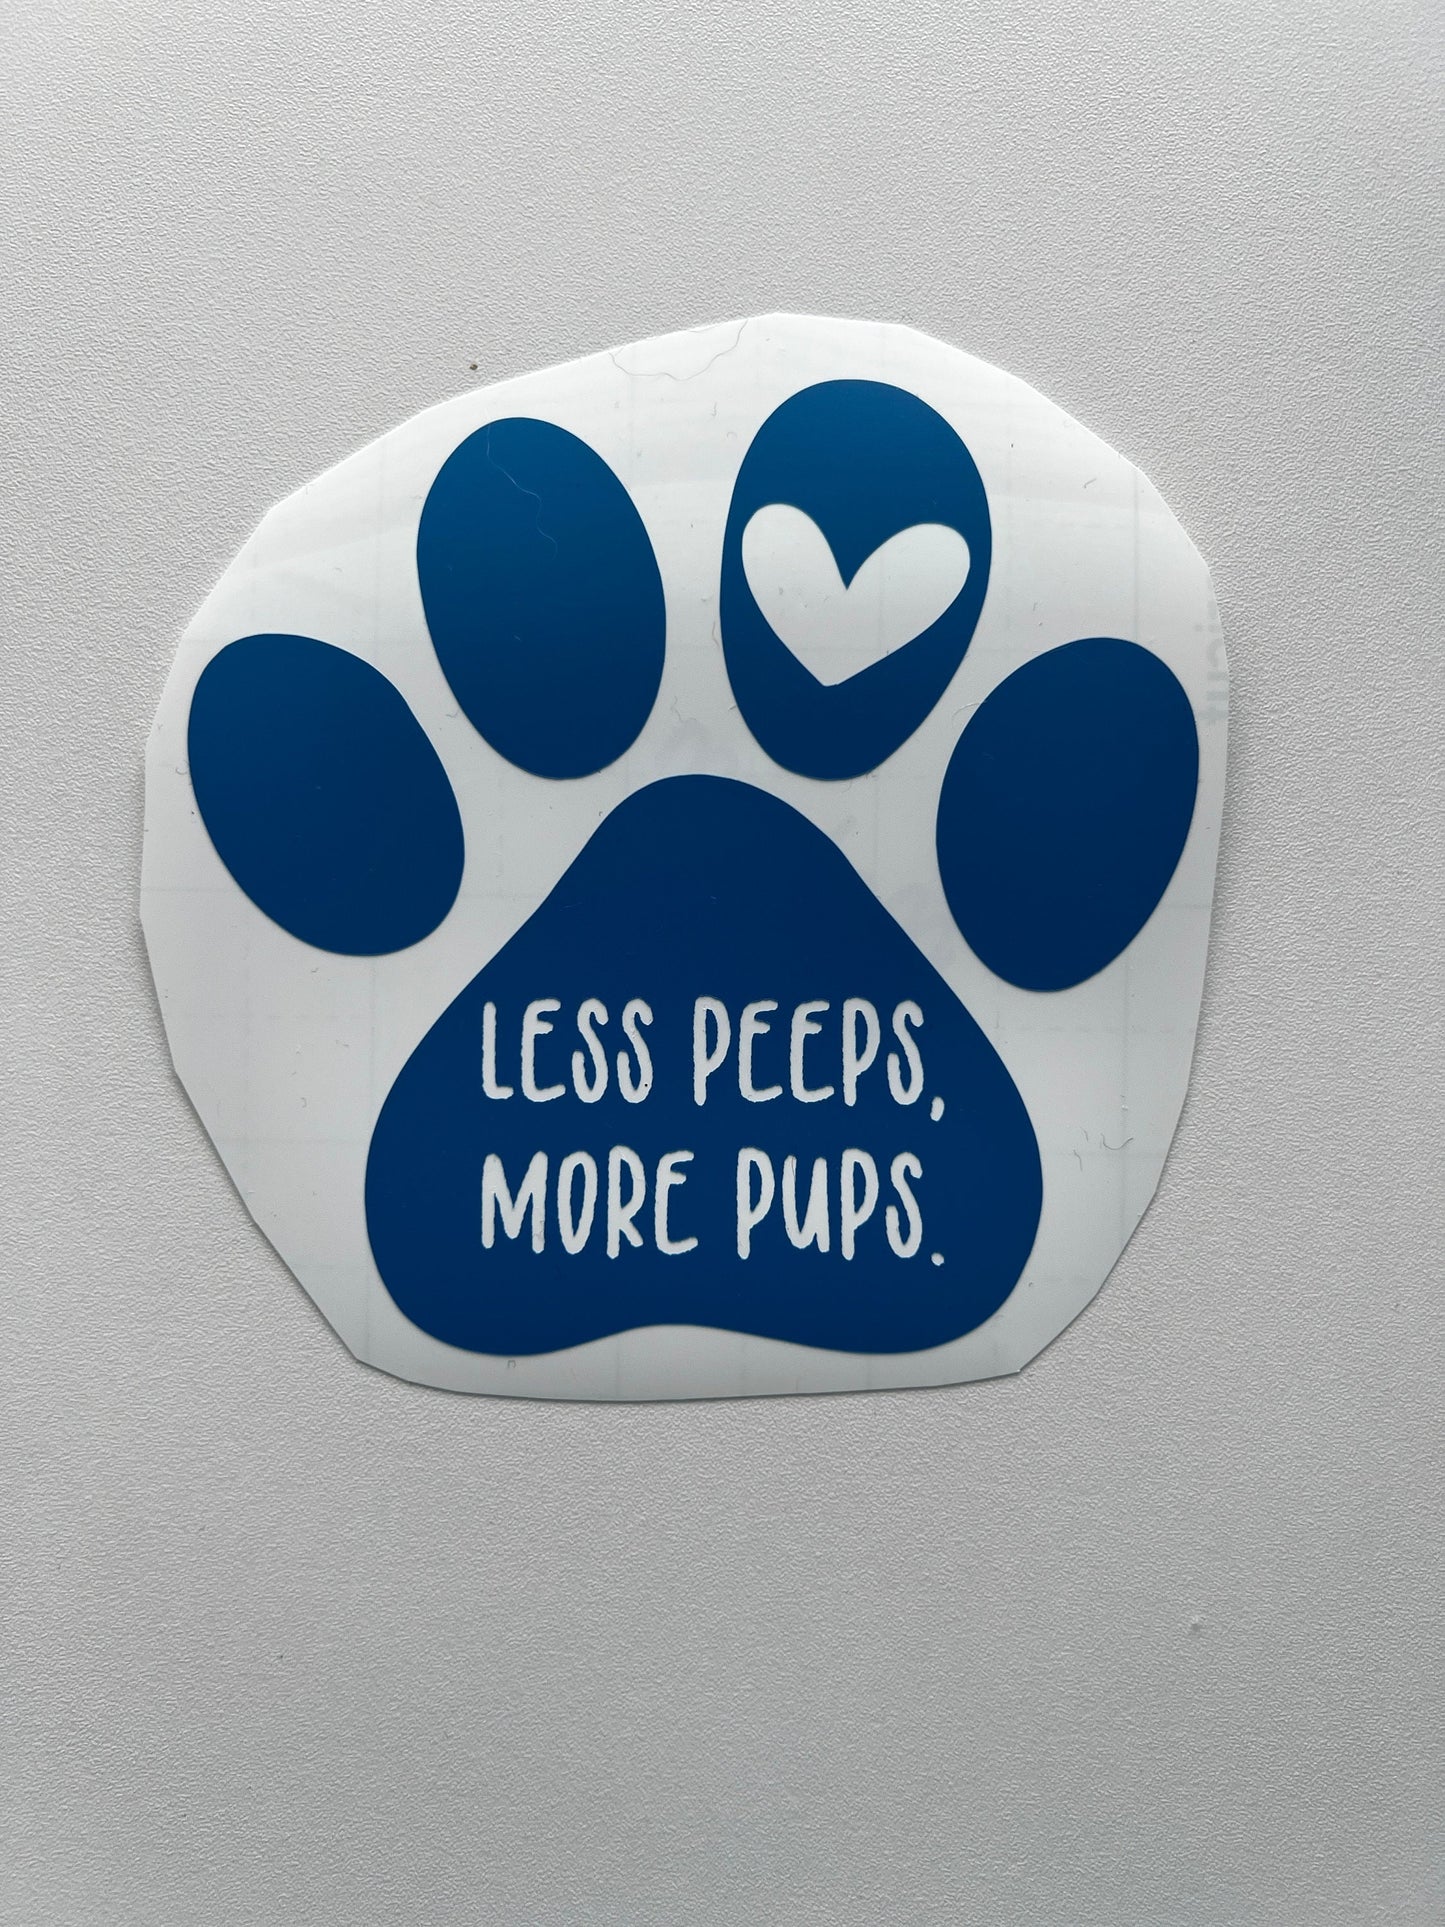 Less peeps, more pups decal